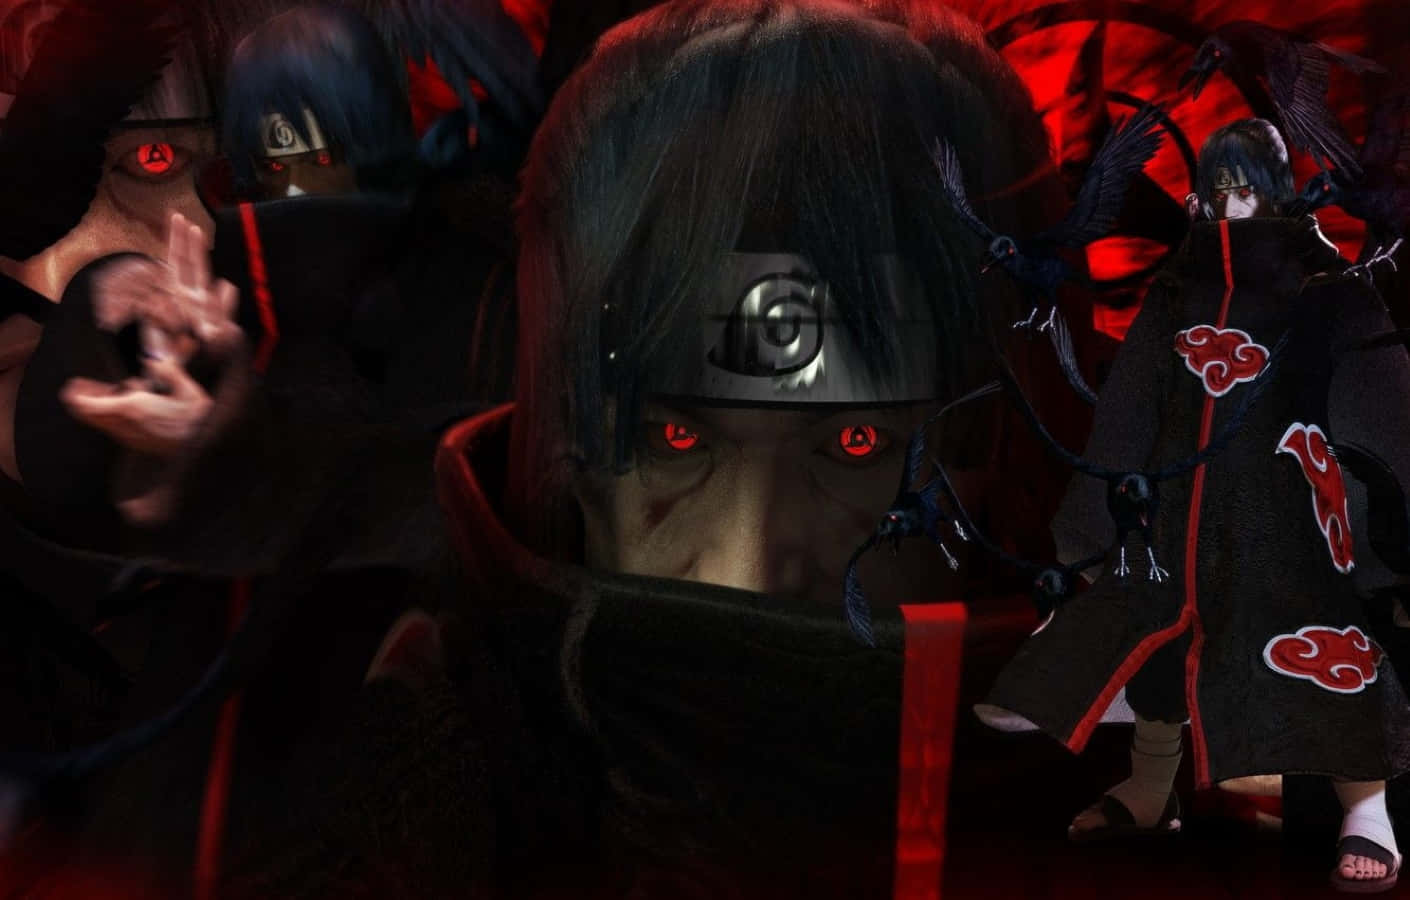 Hiding in the shadows, the Akatsuki ninja emerge to defend justice. Wallpaper